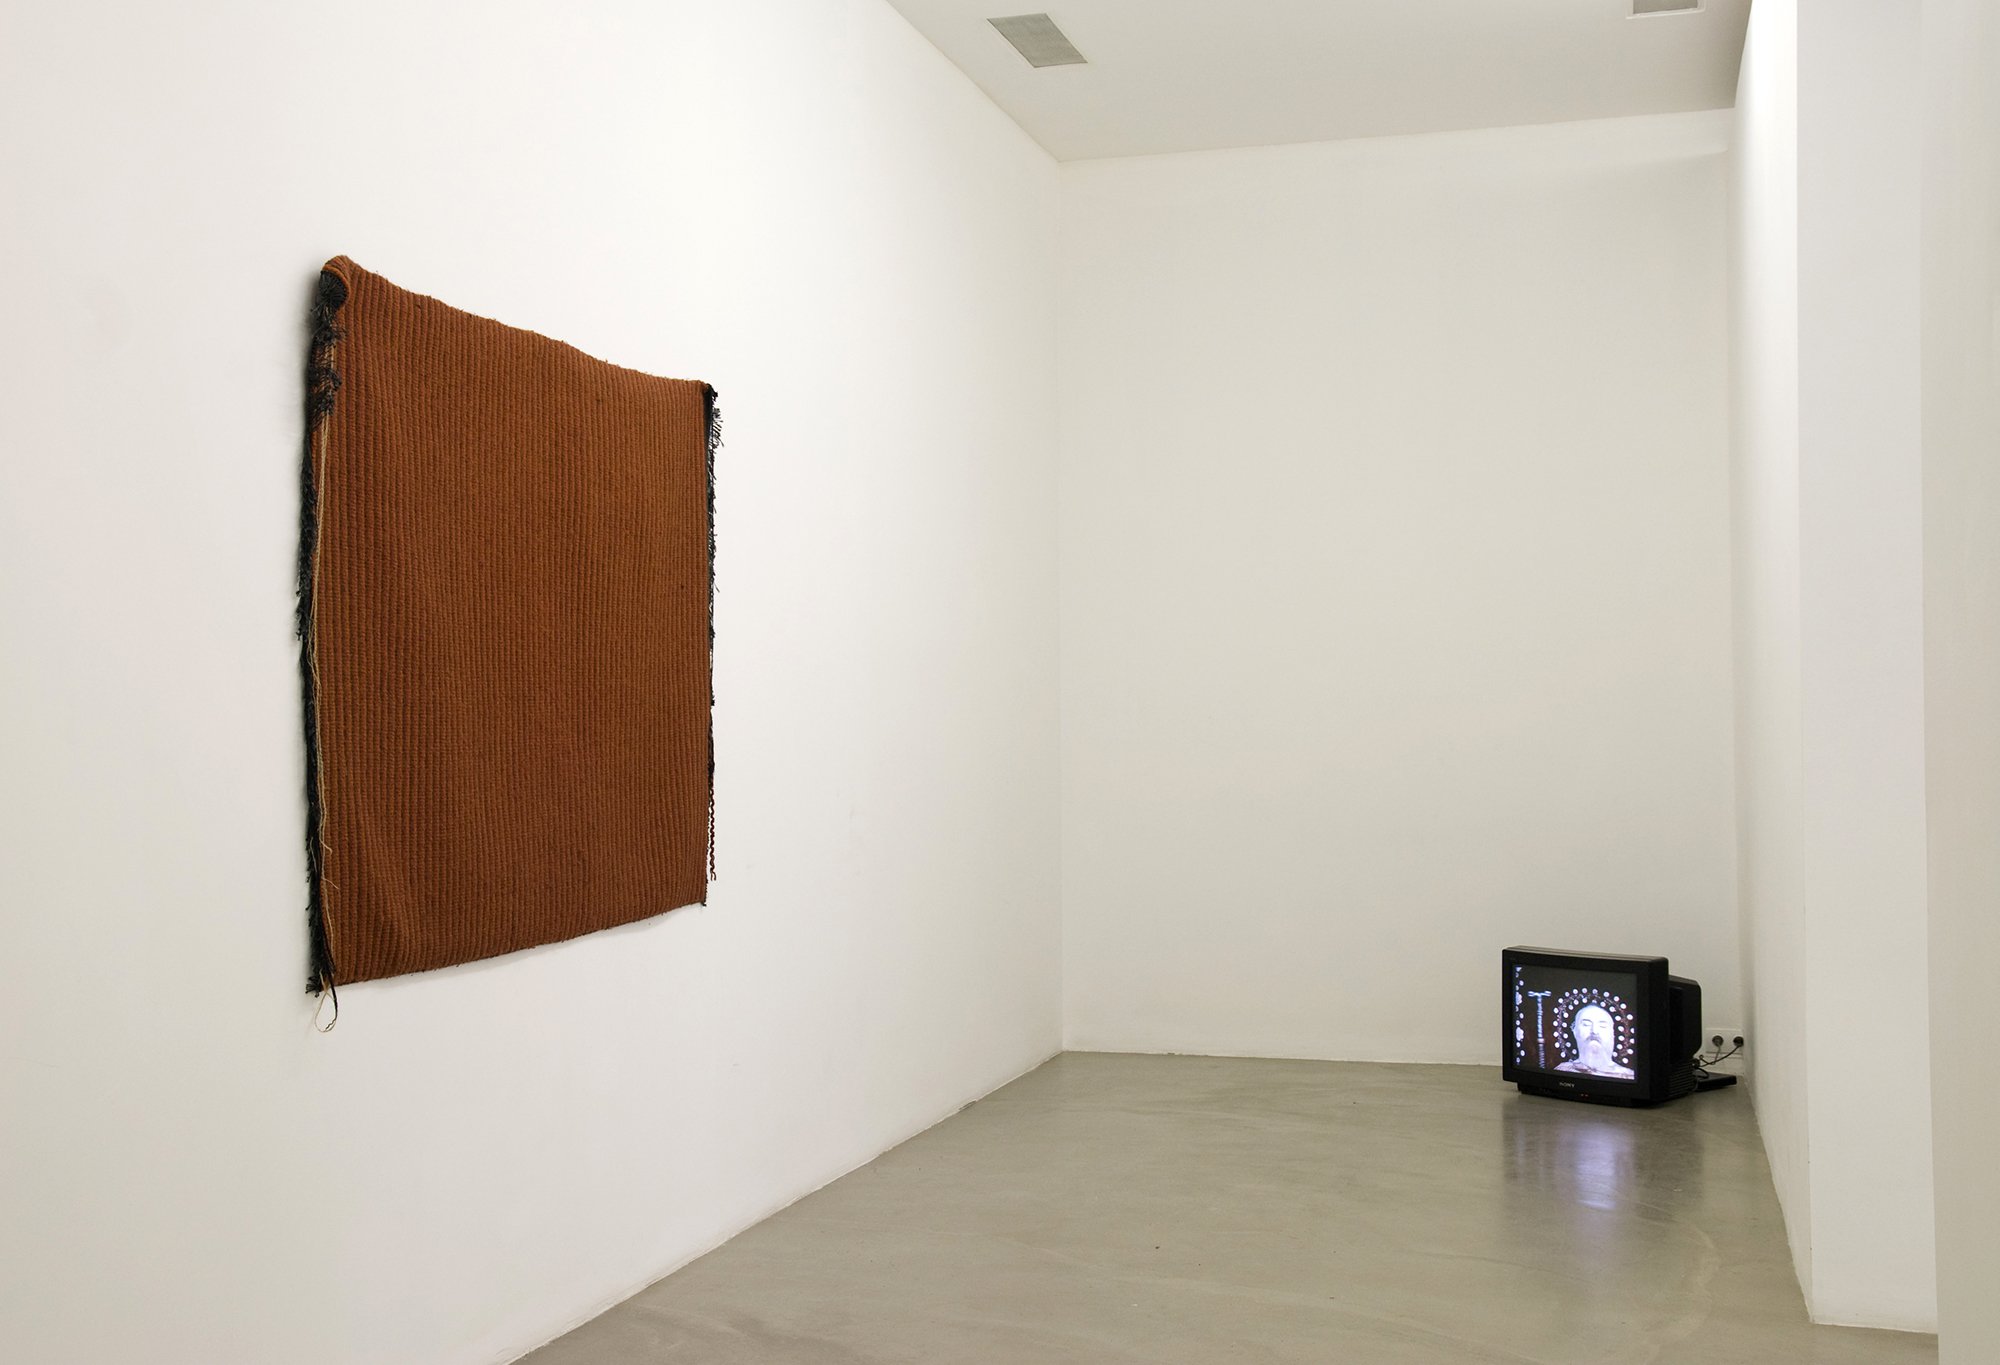 (Left) Cevdet Erek, Shore Scene Soundtrack, carpet &amp; video (2006) &amp; three drawings &amp; one book, 2008. (Right) Sergei Paradjanov, The Color of Pomegranates, film on monitor, 88 min., 1969. Installation view, Altogether Elsewhere, Rodeo, Istanbul, 2010